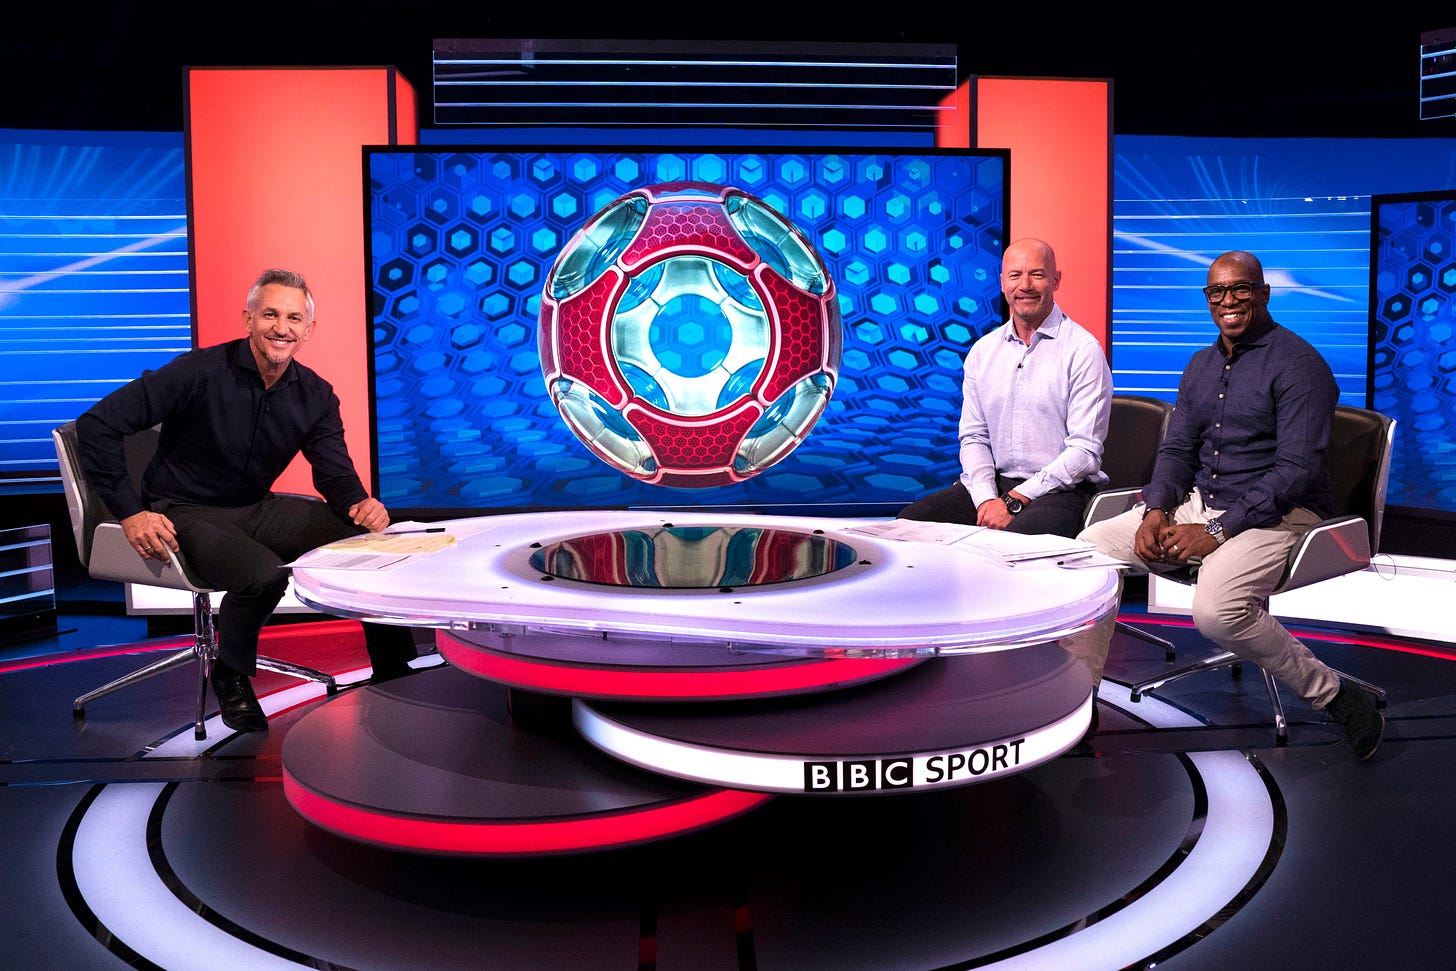 When is Match of the Day on? Watch MOTD on TV and BBC iPlayer | Radio Times